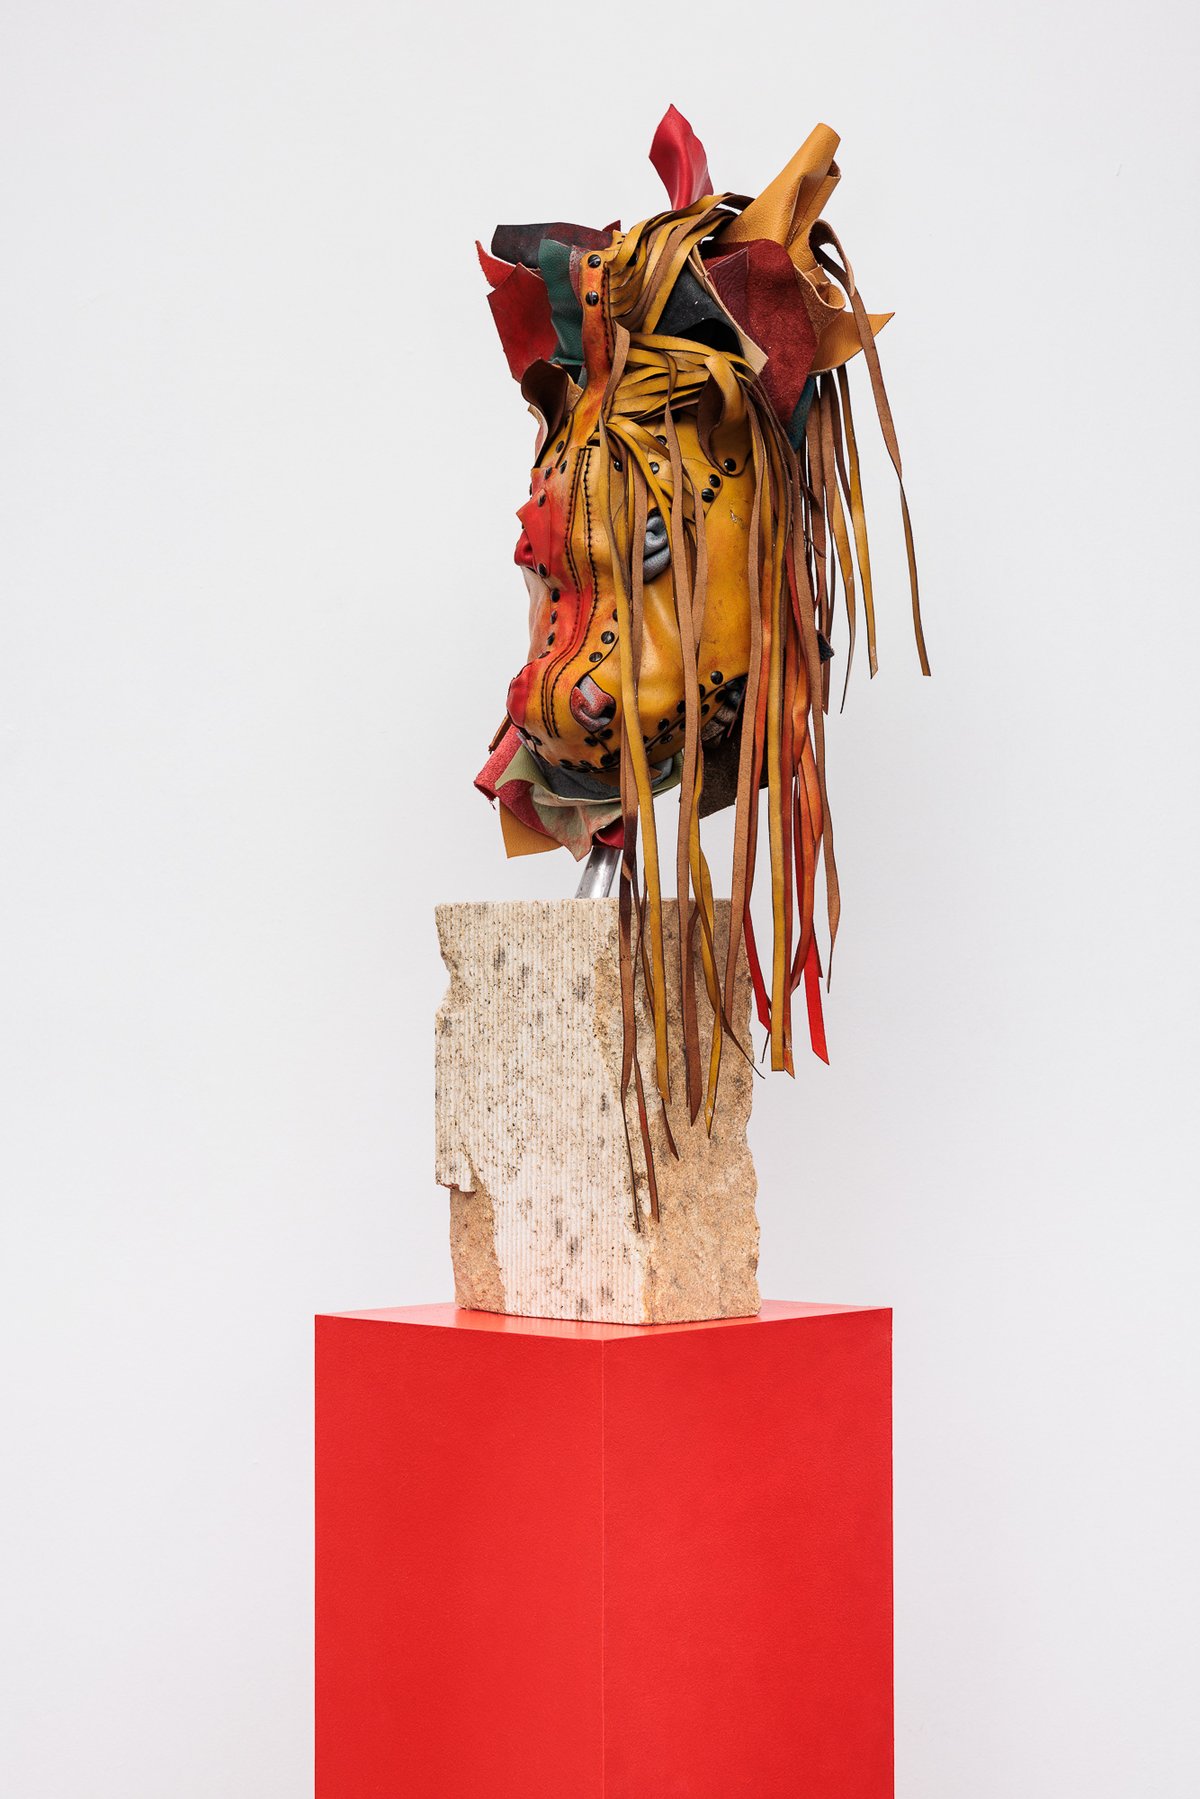 Lena HenkeMemory of a Young Sculpture X, 2024Soldered and boiled leather, pigment and steel mounted on Austrian granite, on wooden pedestal30 x 30 x 167 cm (installed dimensions) / 30 x 30 x 87 cm (dimensions without plinth)